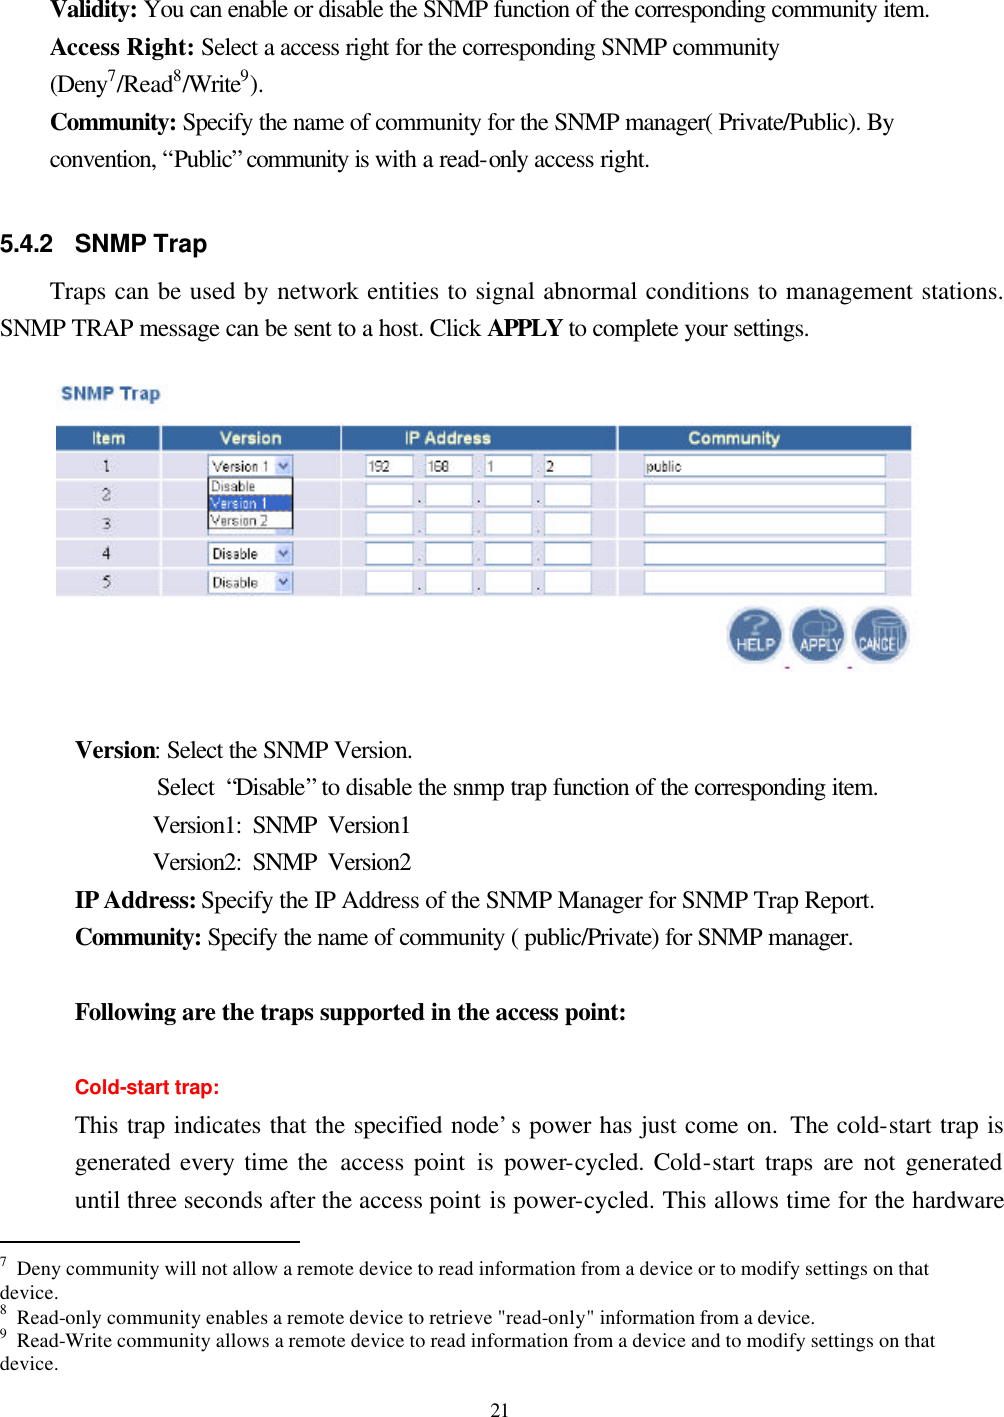  21  Validity: You can enable or disable the SNMP function of the corresponding community item. Access Right: Select a access right for the corresponding SNMP community (Deny7/Read8/Write9).     Community: Specify the name of community for the SNMP manager( Private/Public). By convention, “Public” community is with a read-only access right.  5.4.2 SNMP Trap Traps can be used by network entities to signal abnormal conditions to management stations. SNMP TRAP message can be sent to a host. Click APPLY to complete your settings.  Version: Select the SNMP Version.        Select “Disable” to disable the snmp trap function of the corresponding item.          Version1: SNMP Version1        Version2: SNMP Version2 IP Address: Specify the IP Address of the SNMP Manager for SNMP Trap Report. Community: Specify the name of community ( public/Private) for SNMP manager.  Following are the traps supported in the access point:  Cold-start trap:   This trap indicates that the specified node’s power has just come on. The cold-start trap is generated every time the access point is power-cycled. Cold-start traps are not generated until three seconds after the access point is power-cycled. This allows time for the hardware                                                  7 Deny community will not allow a remote device to read information from a device or to modify settings on that device. 8 Read-only community enables a remote device to retrieve &quot;read-only&quot; information from a device. 9 Read-Write community allows a remote device to read information from a device and to modify settings on that device. 